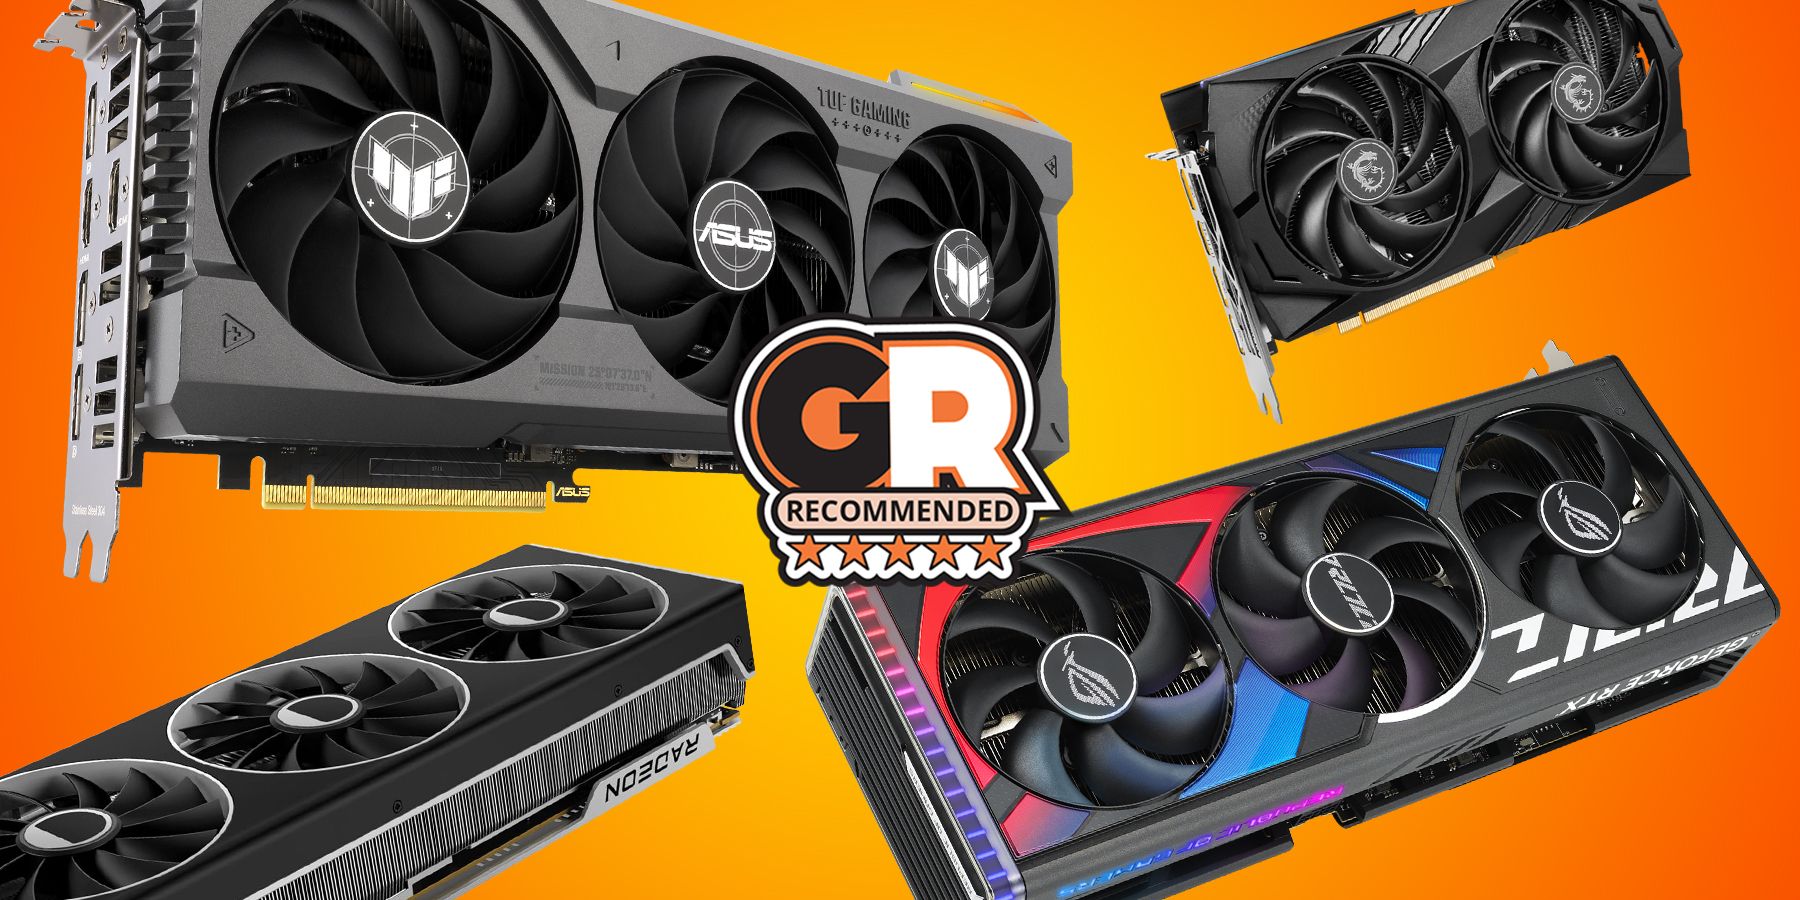 The Best GPUs For Gaming On The AMD Ryzen 7800X3D